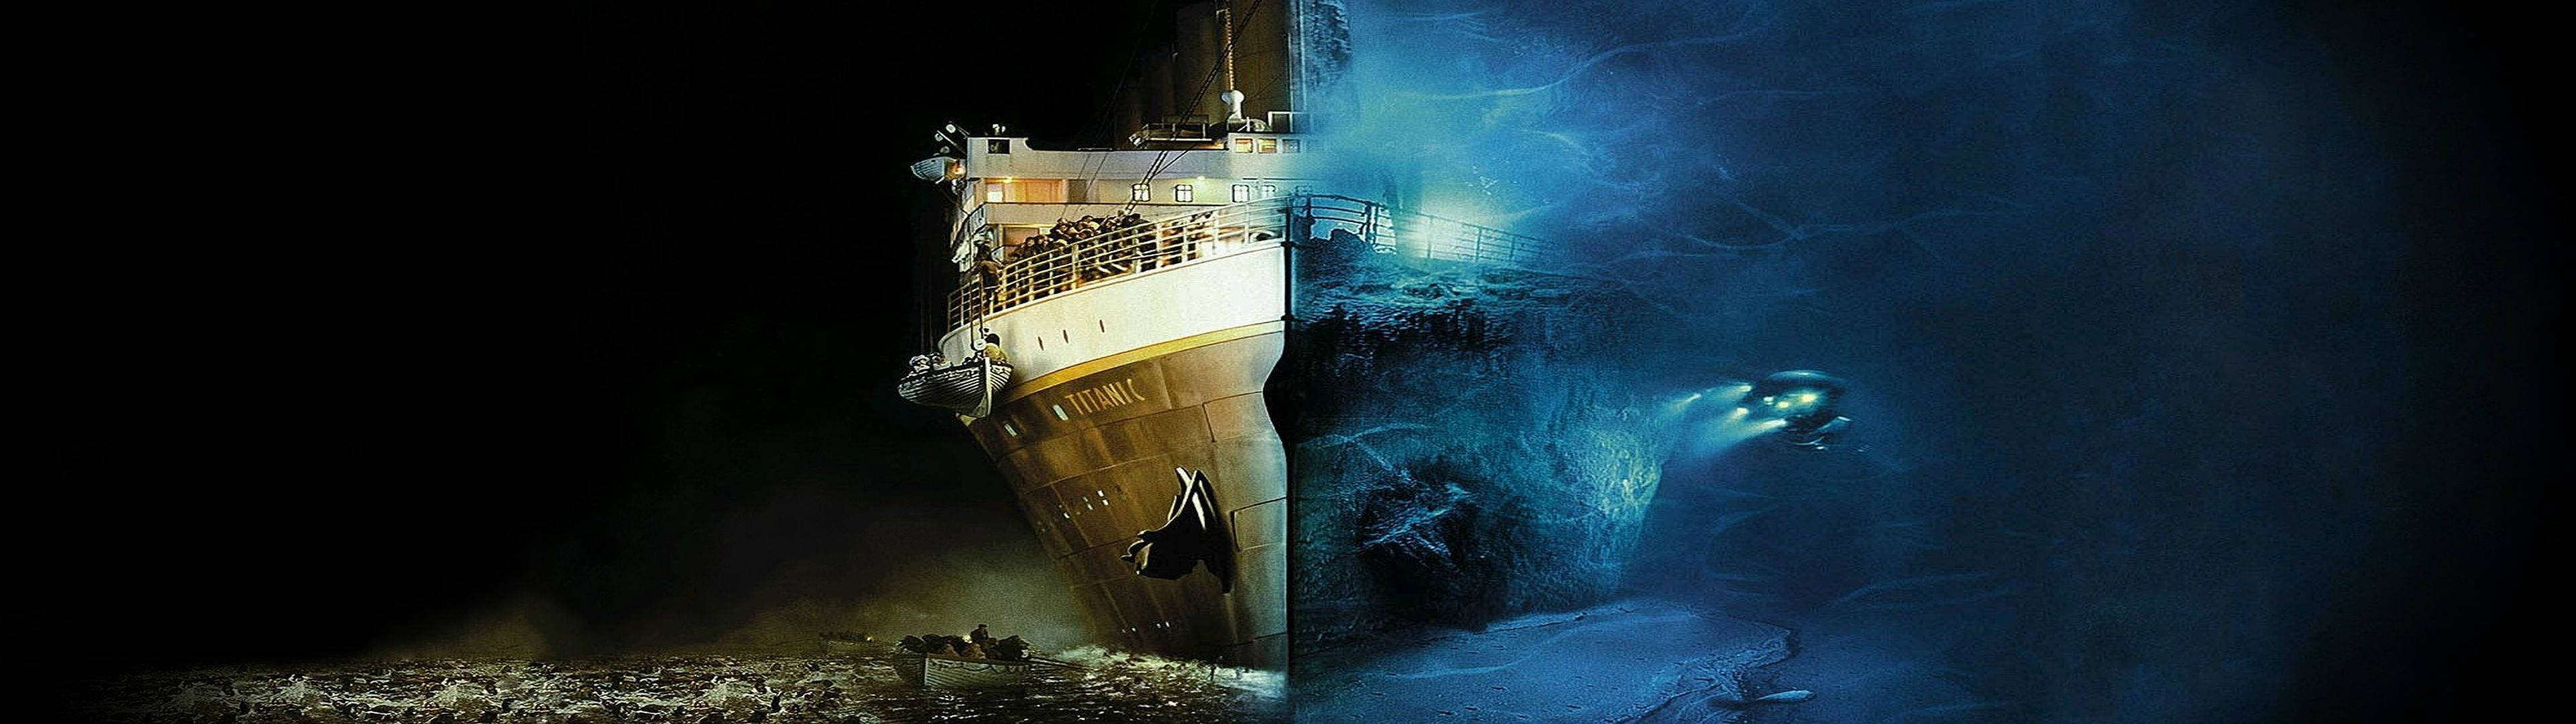 Titanic Above And Under The Sea Dual Monitor Wallpaper